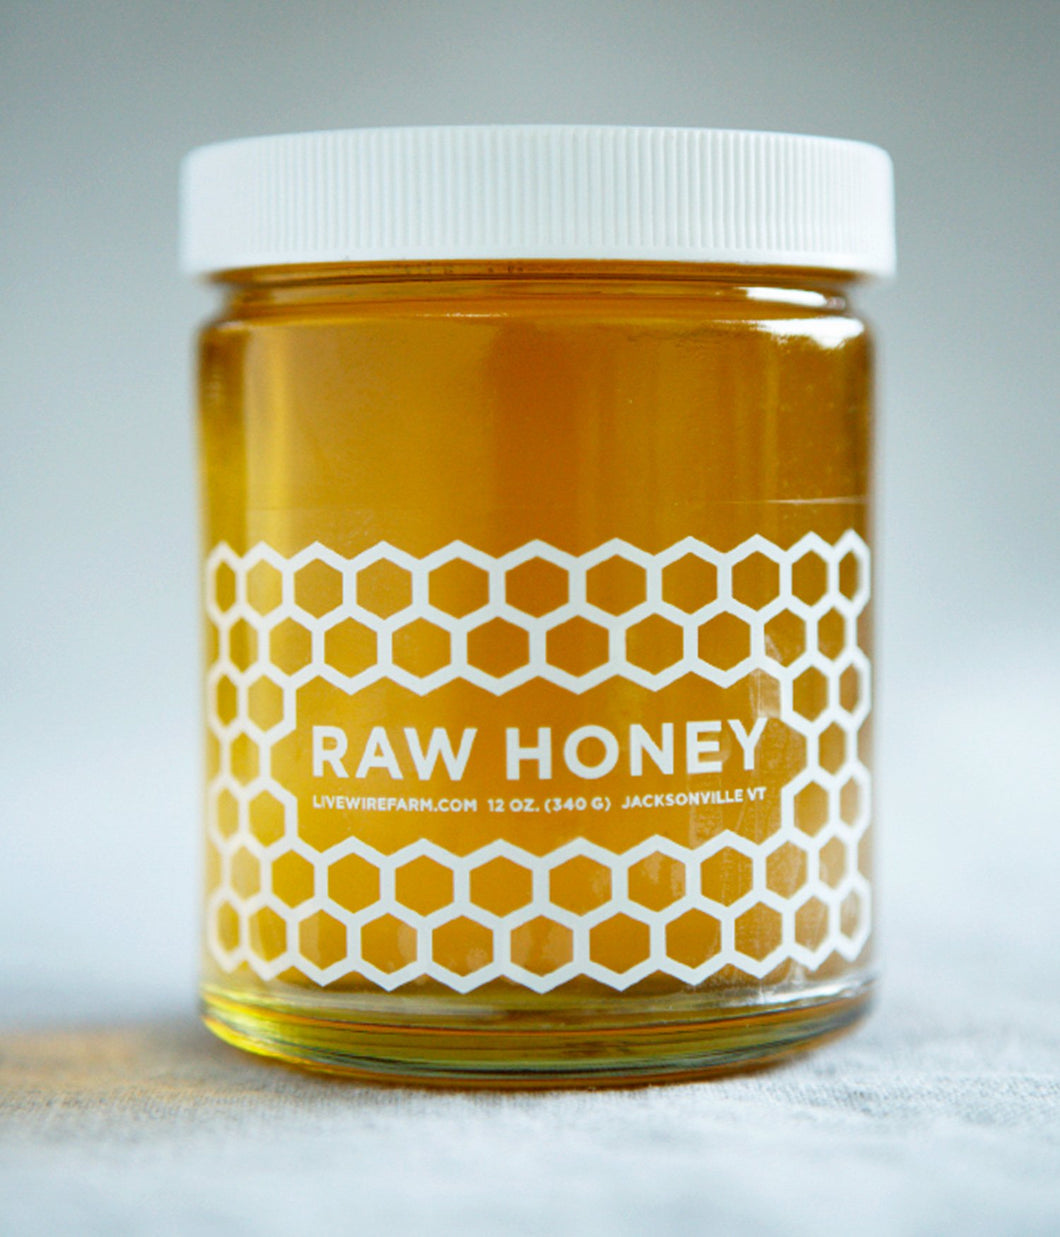 Honey from Live Wire Farm